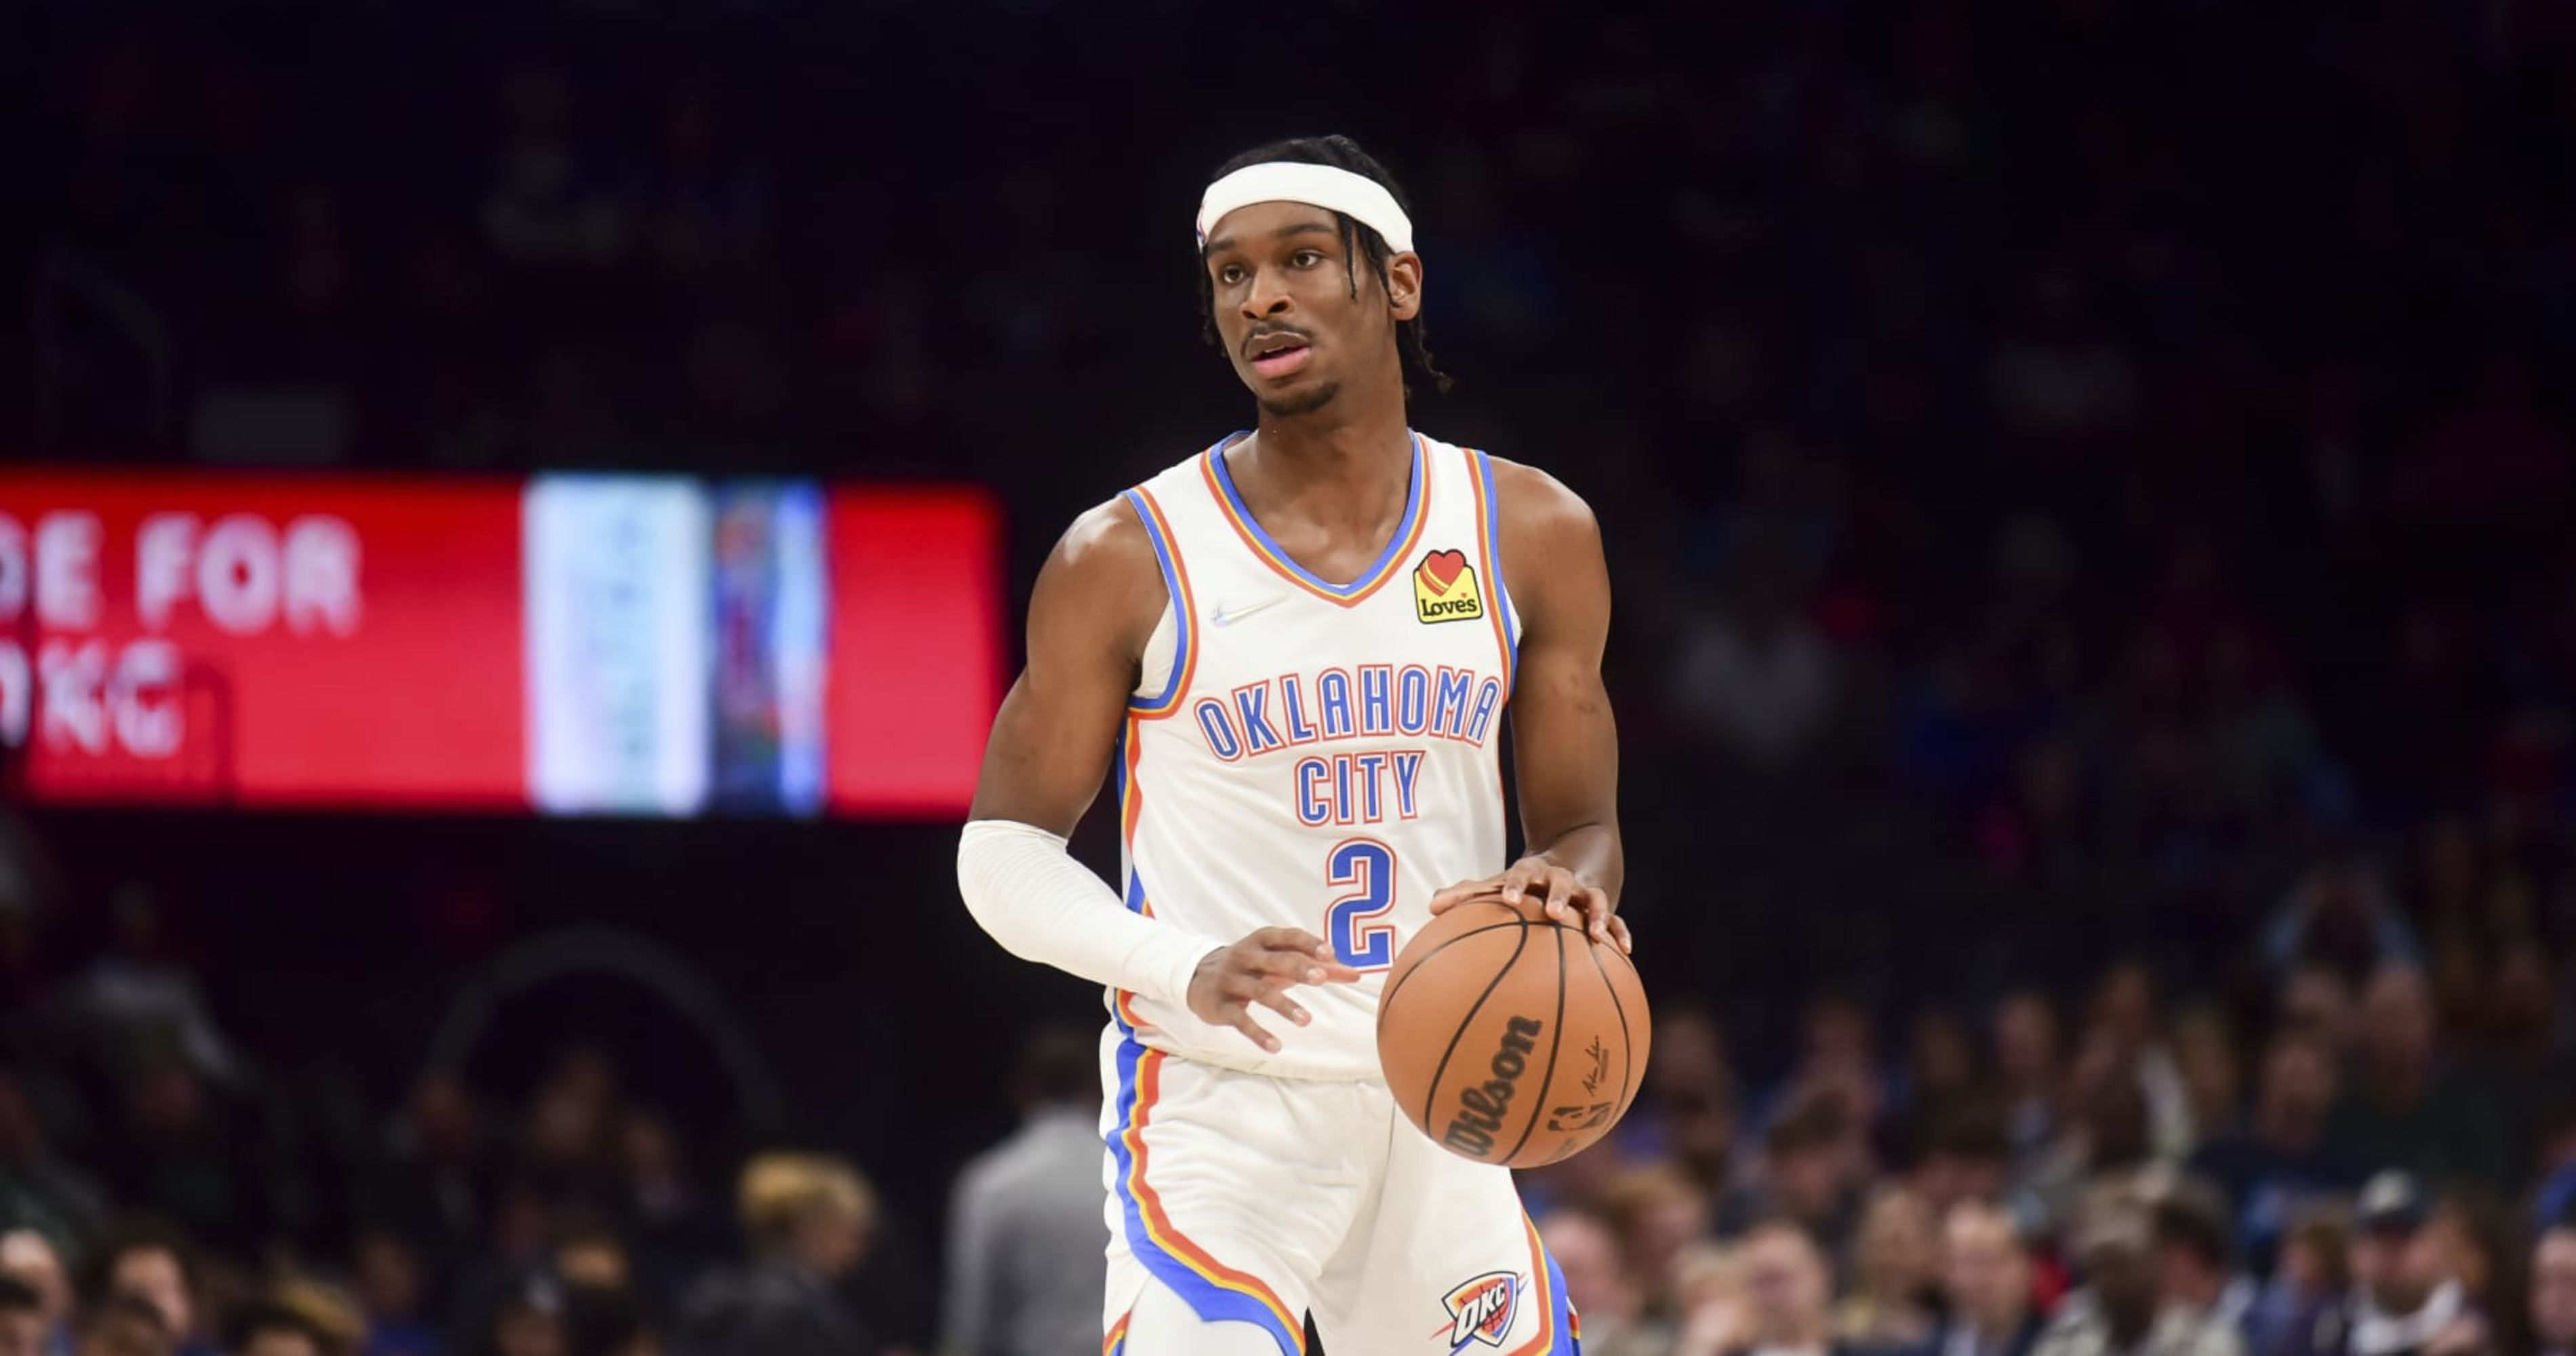 Shai Gilgeous-Alexander will miss start of training camp due to MCL sprain